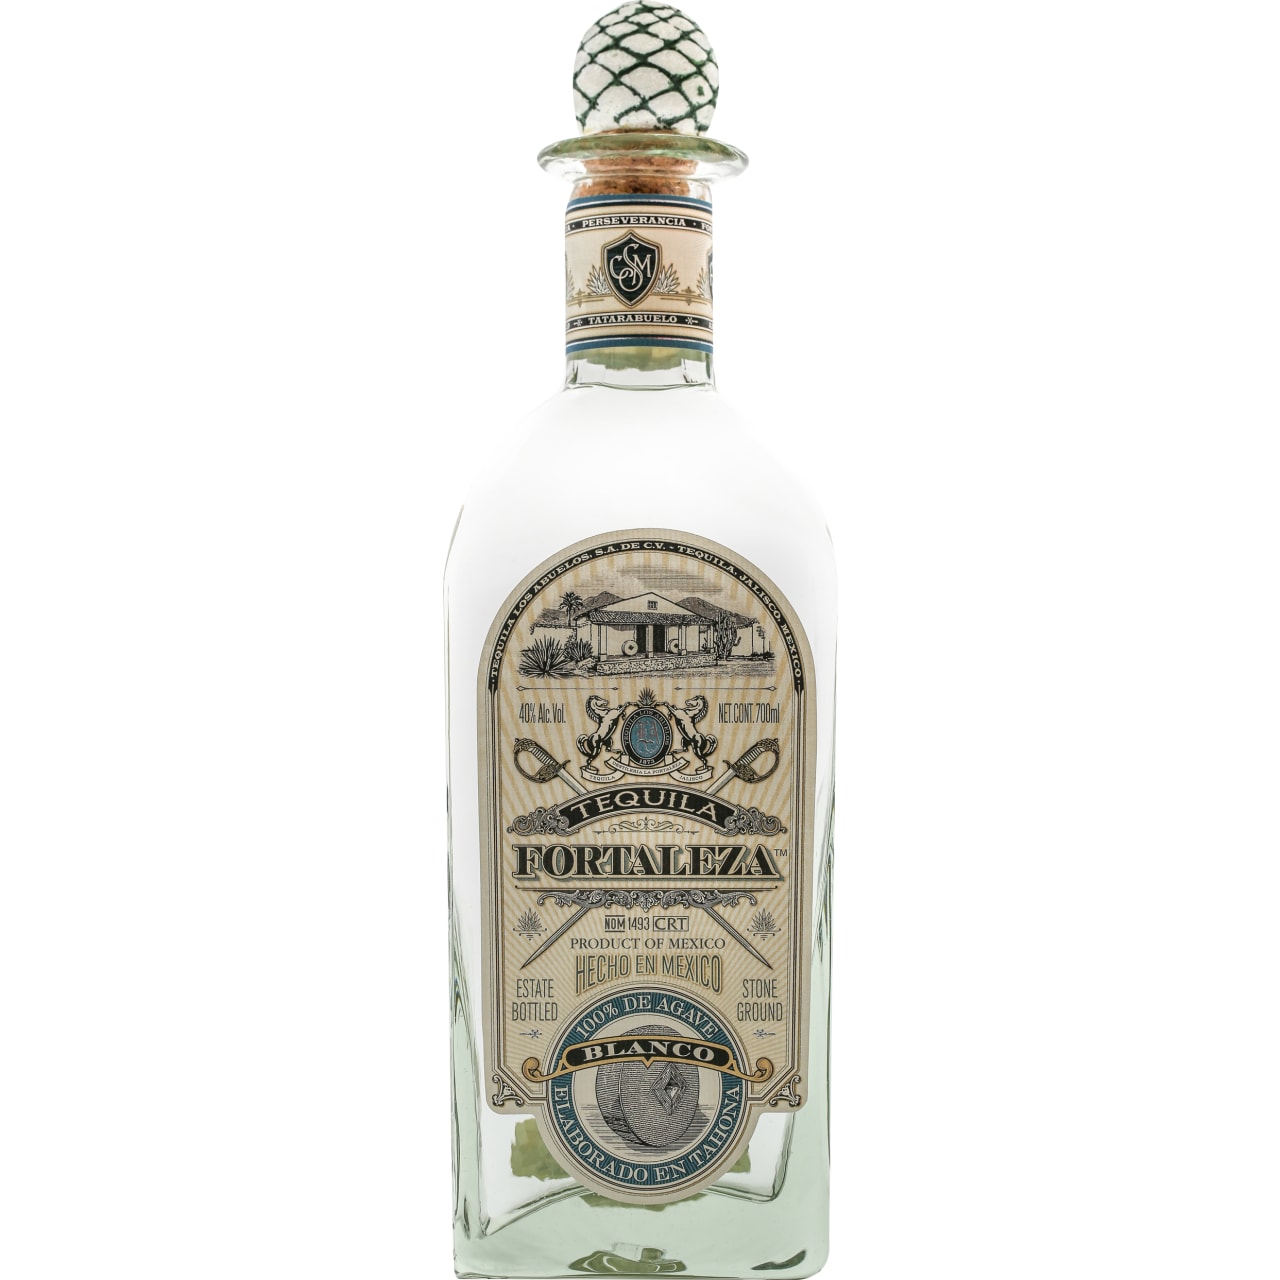 Aromas of citrus, and rich cooked agave fill your nose in this unique and very special blanco tequila. Butter, olive, earth, black pepper, and a deep inviting vegetal complexity are all present.